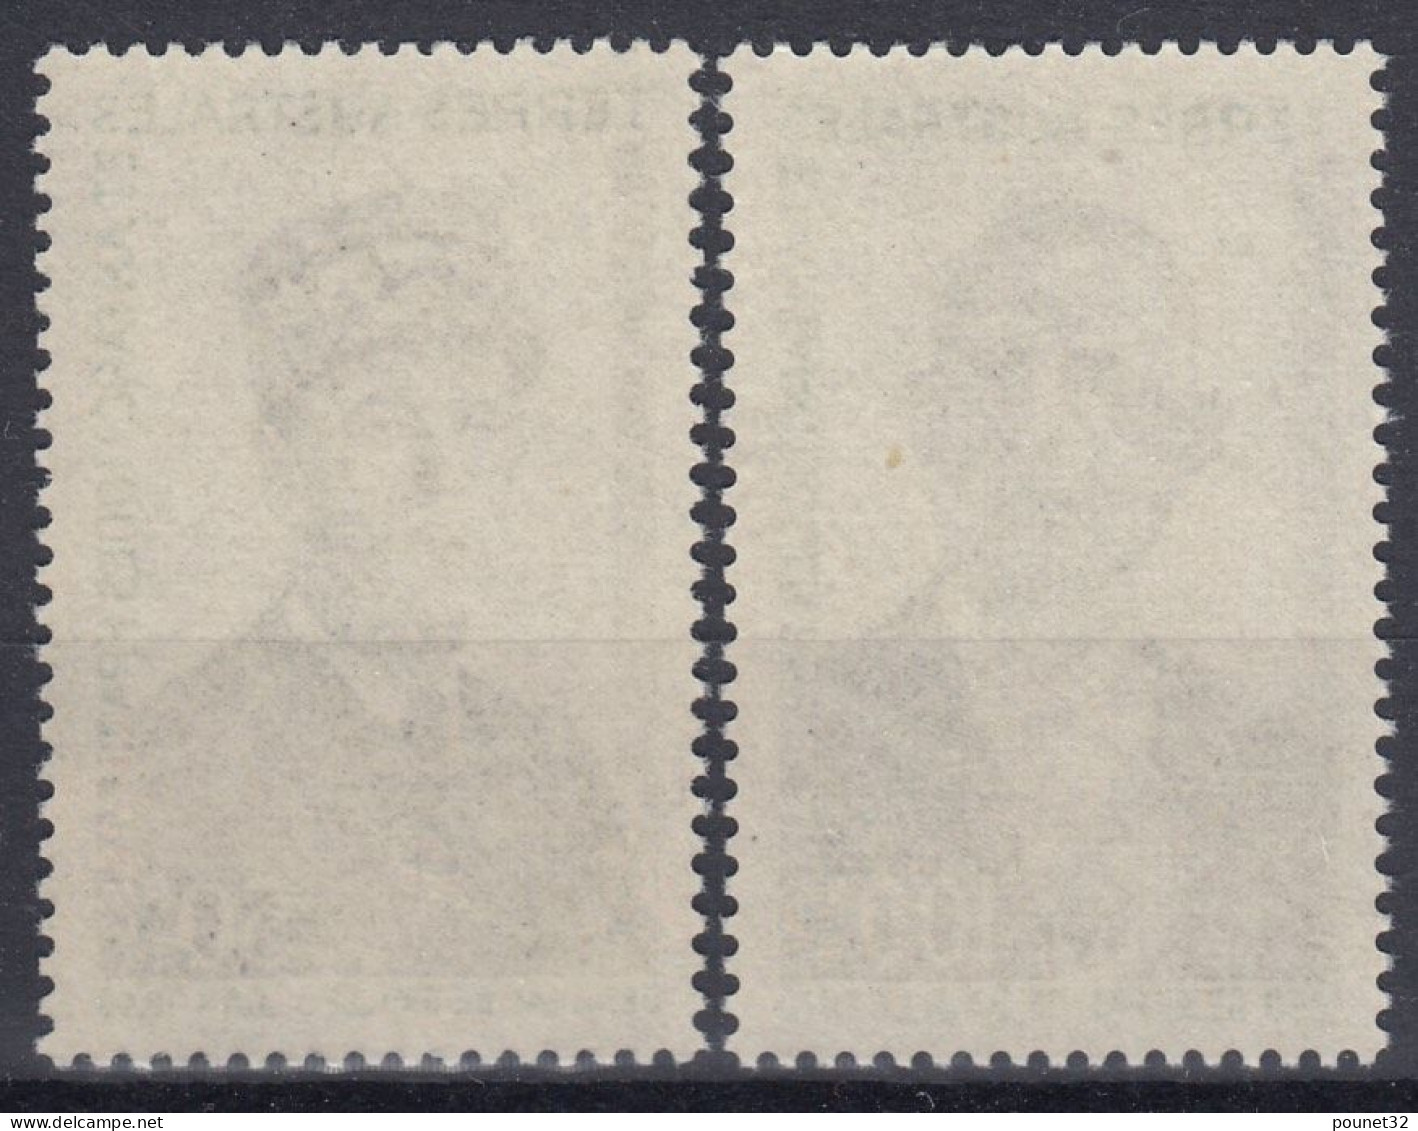 TIMBRE TAAF GENERAL DE GAULLE N° 46 & 47 NEUFS ** GOMME SANS CHARNIERE - Unused Stamps